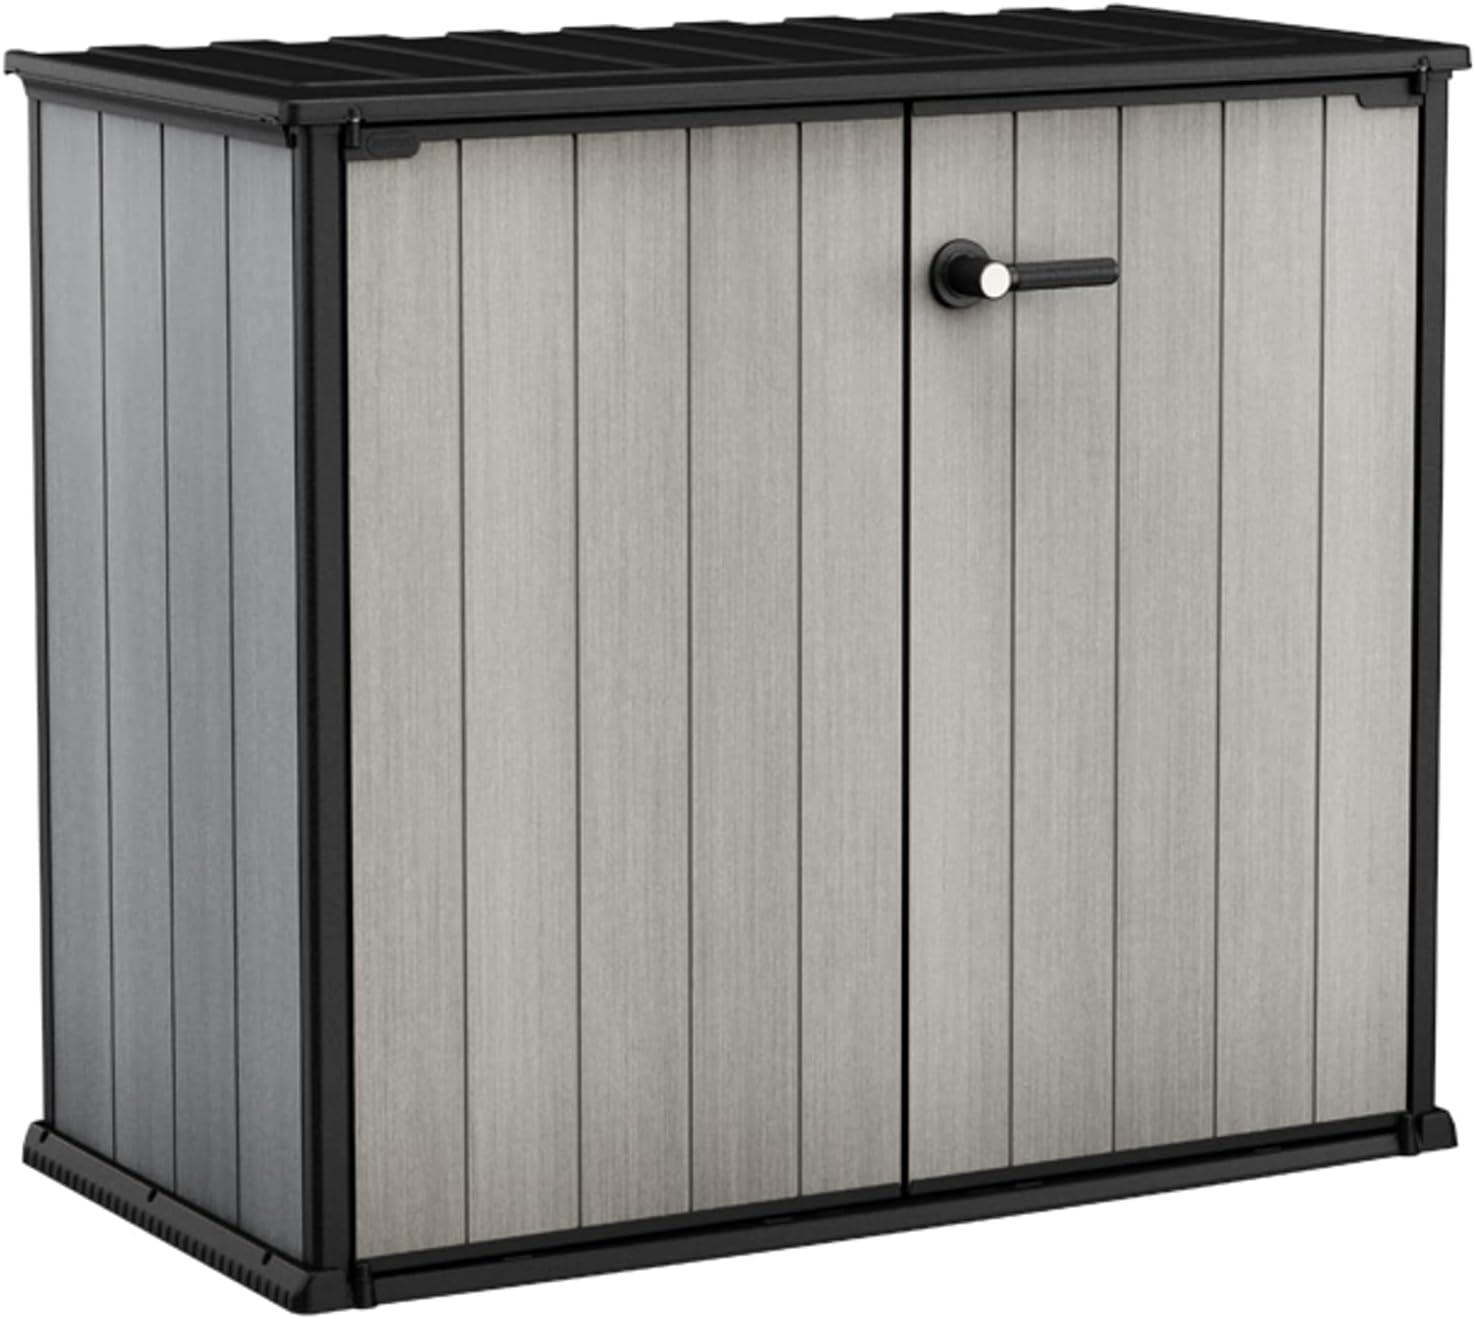 KETER Patio Store 4.6 x 2.5 Foot Resin Outdoor Storage Shed with Paintable and Drillable Walls for Customization-Perfect for Yard Tools and Pool Toys, Grey